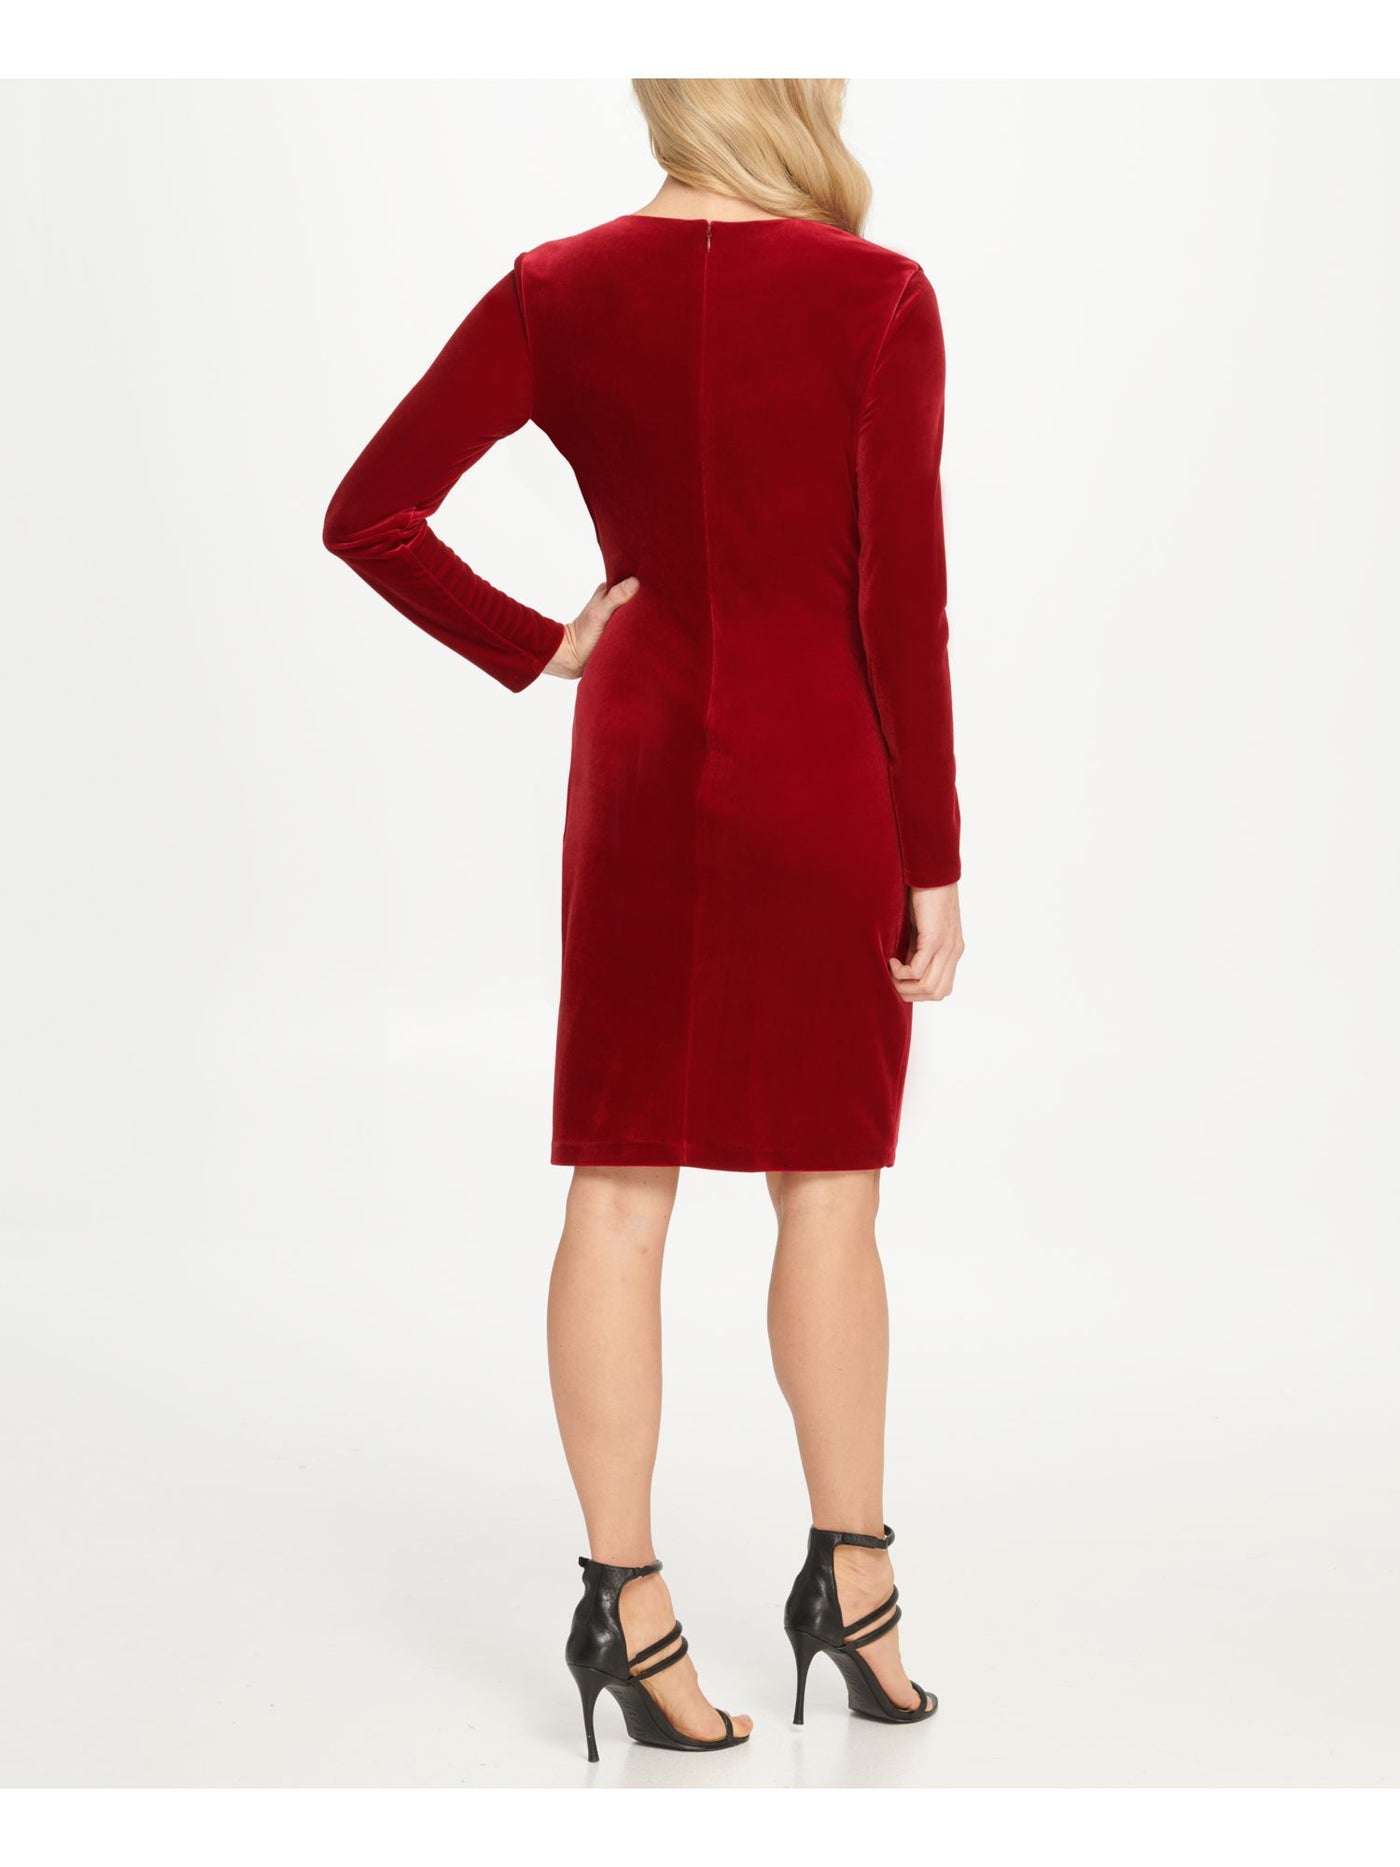 DKNY Womens Red Ruched Long Sleeve V Neck Knee Length Cocktail Sheath Dress 6